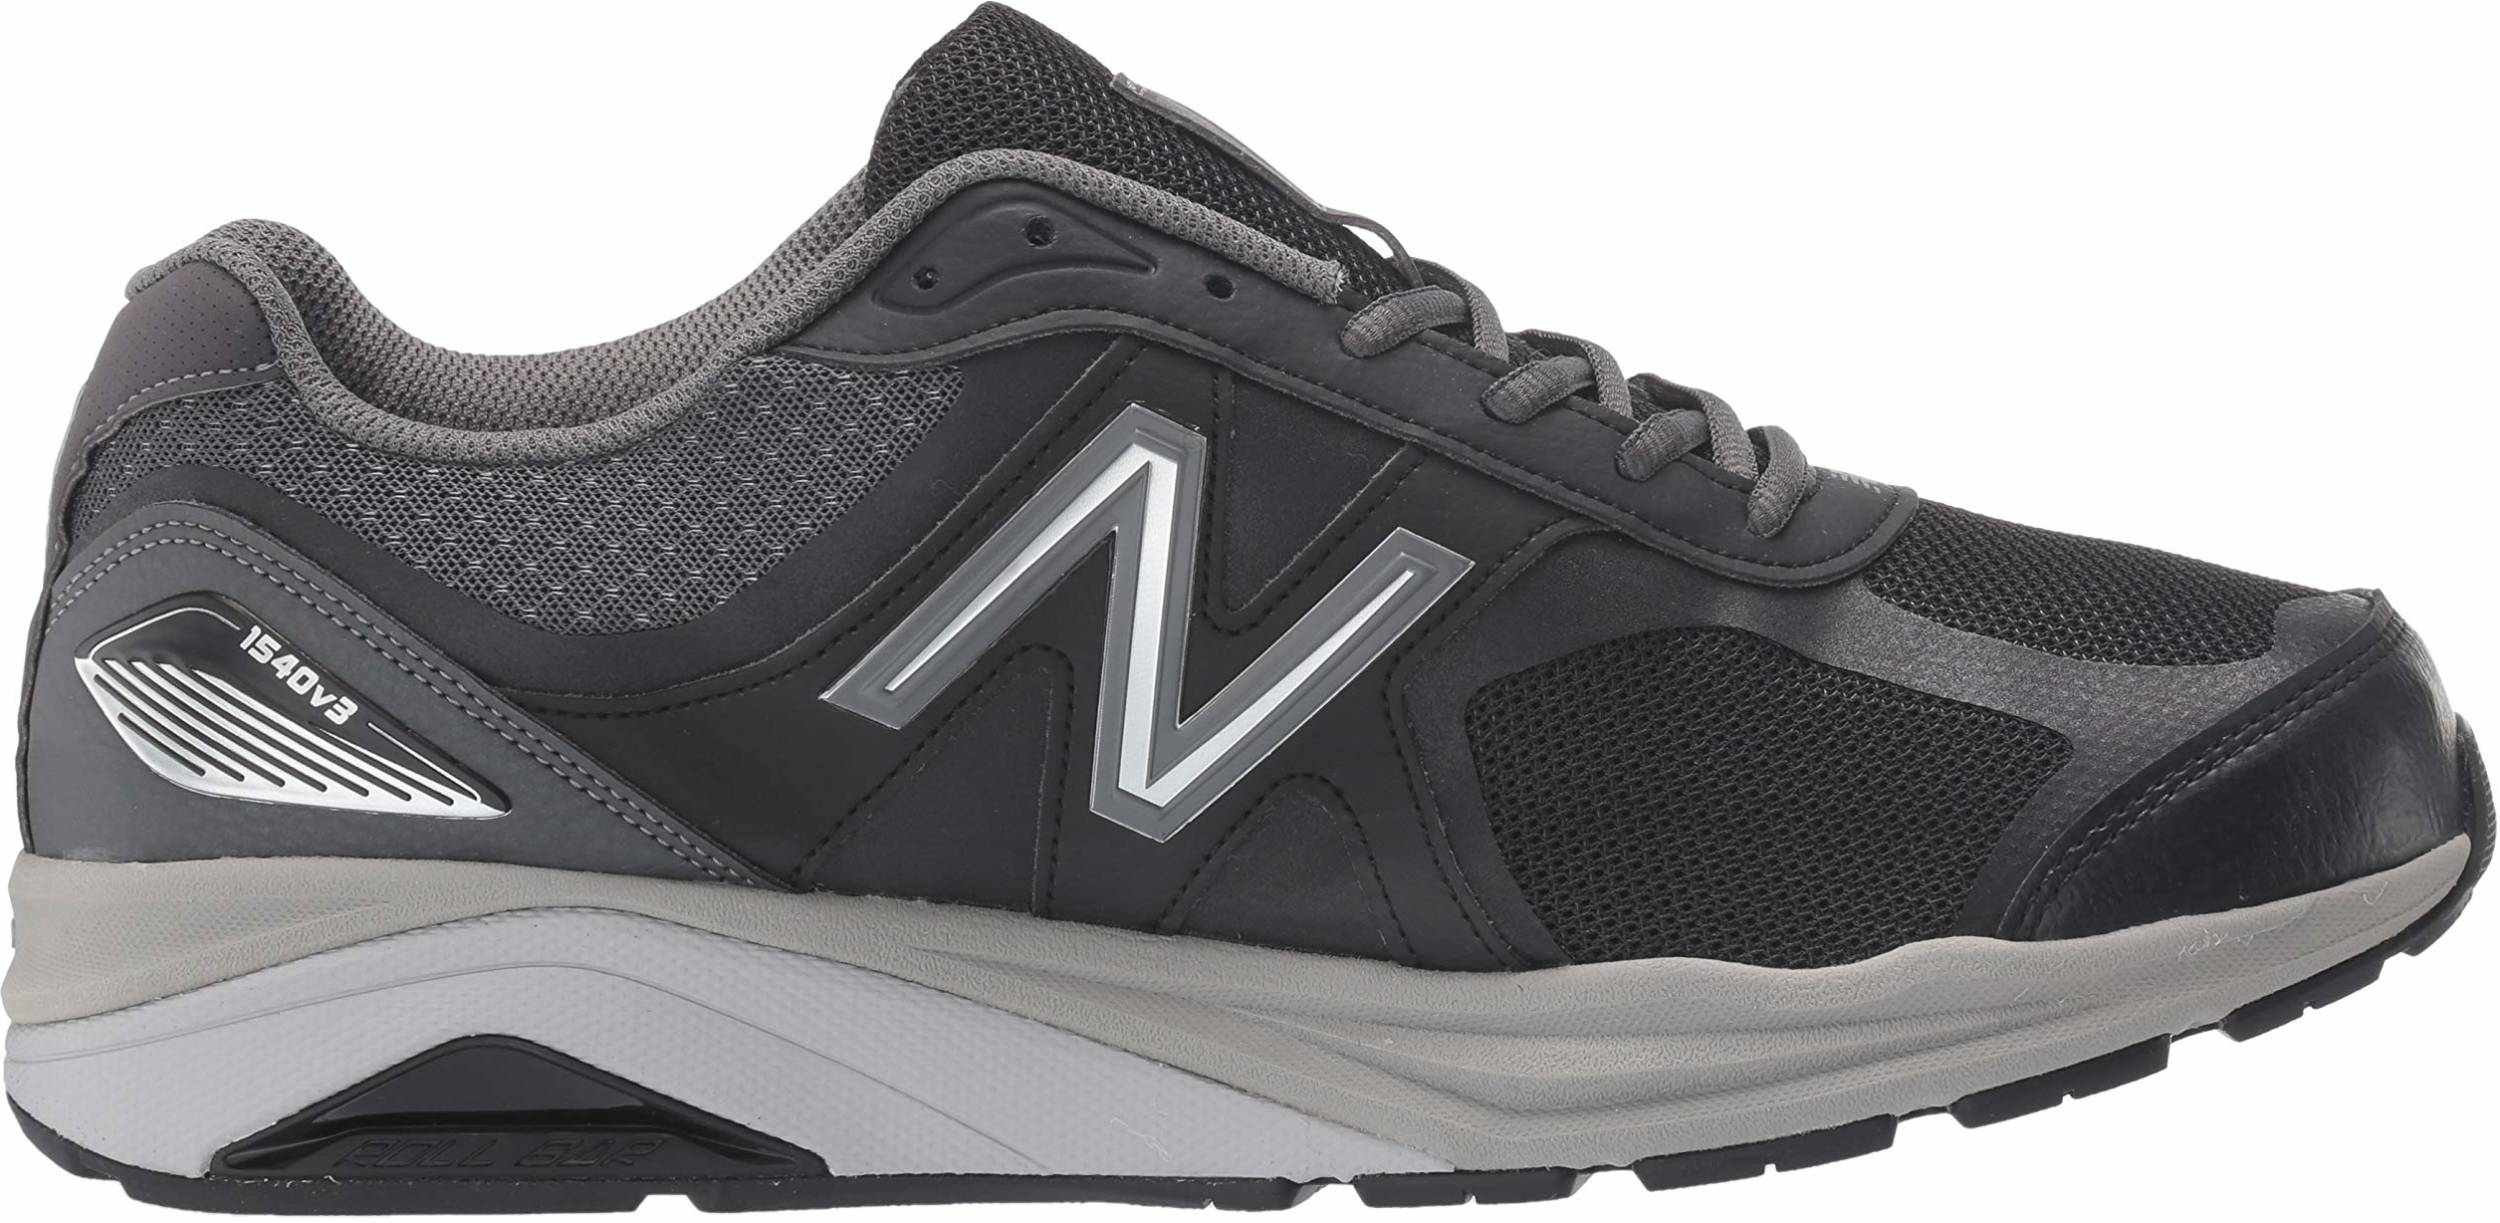 Only $145 + Review of New Balance 1540 v3 | RunRepeat